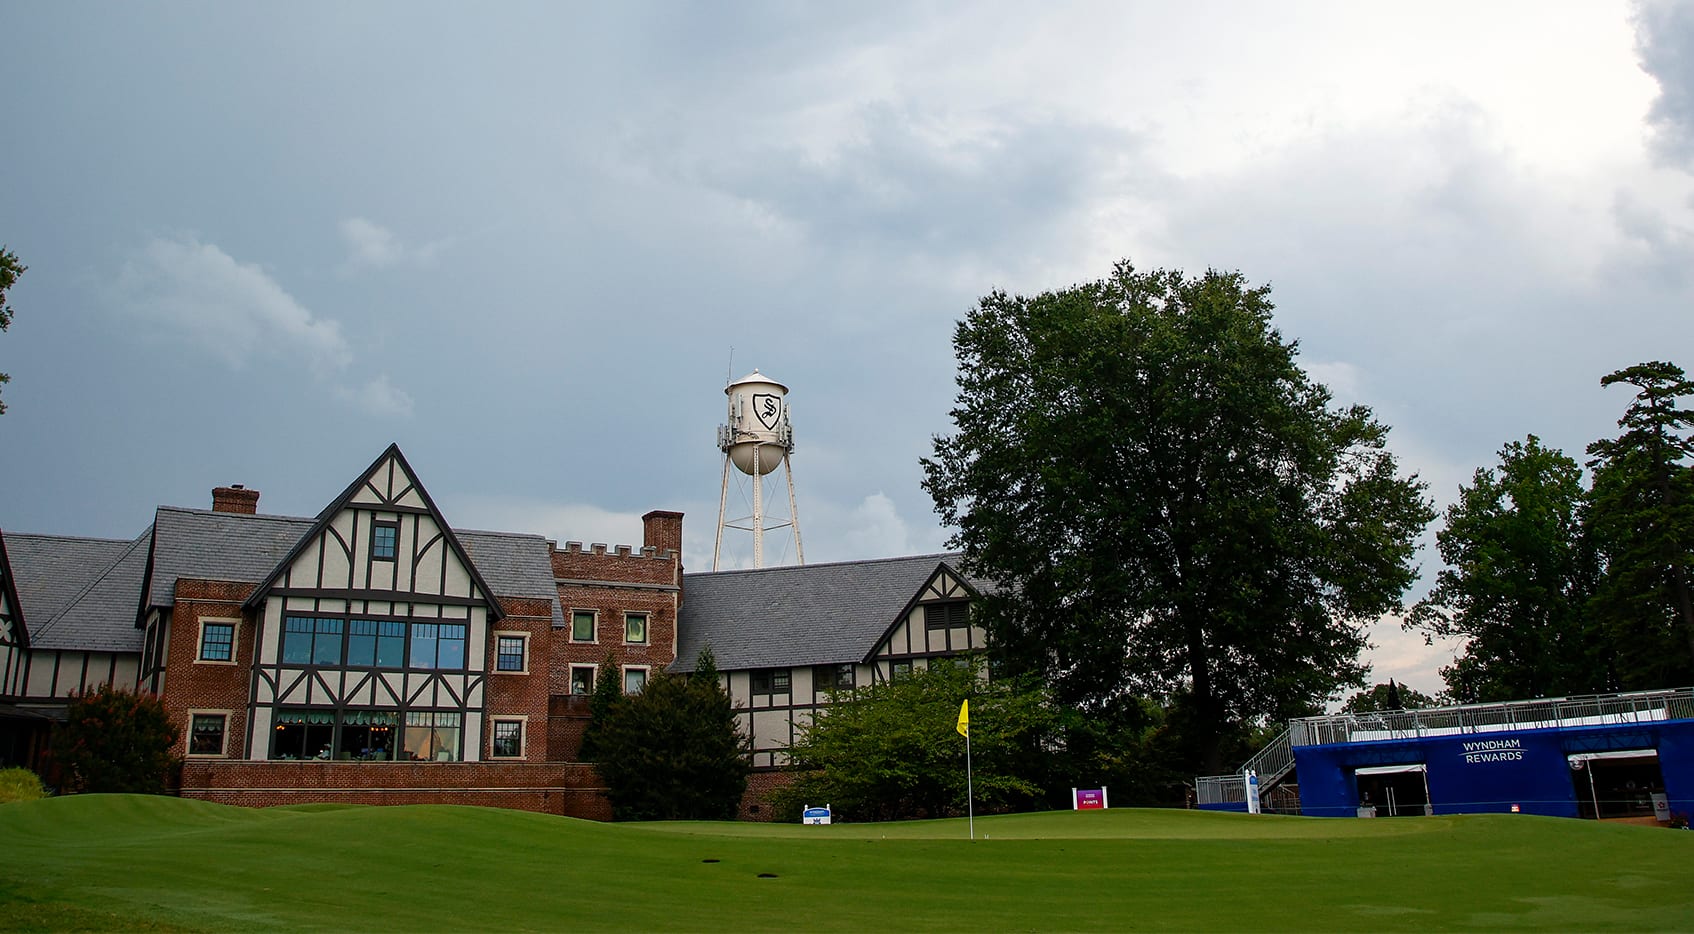 How to watch Wyndham Championship, Round 3 Featured Groups, live scores, tee times, TV times